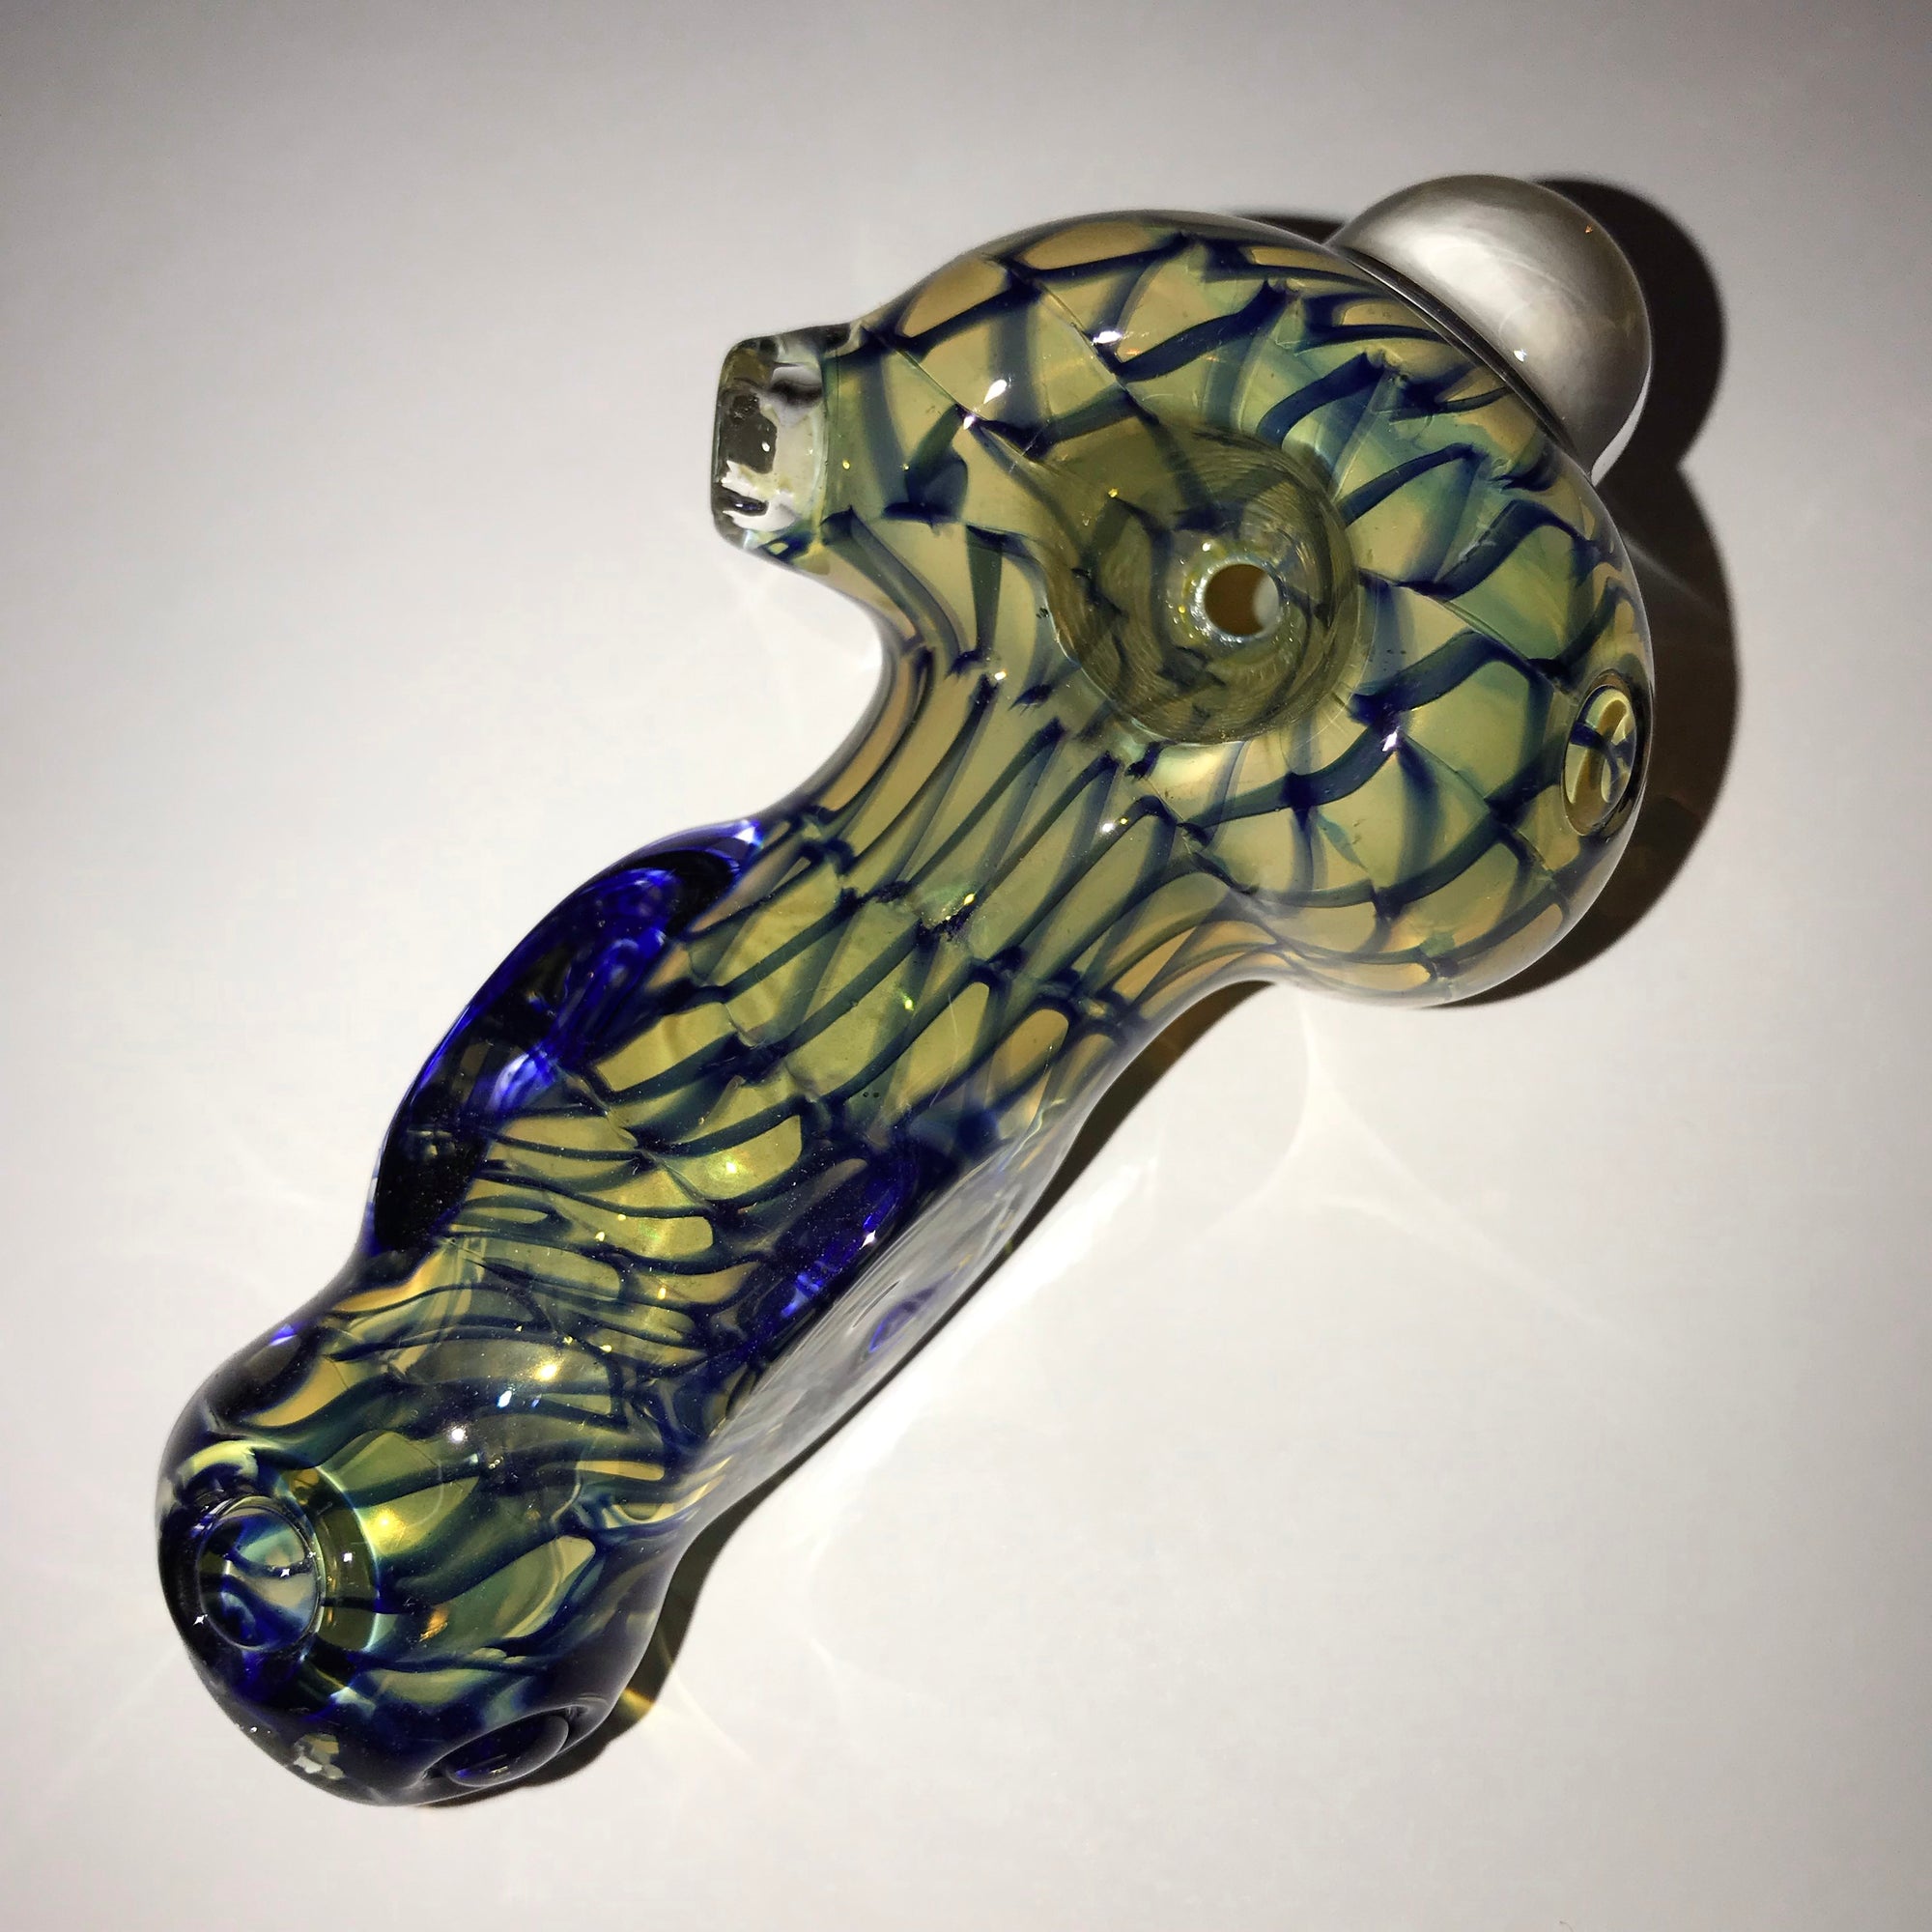 Coil Spoon Pipe (Nelson Glassworks) NG4 Coil Spoons